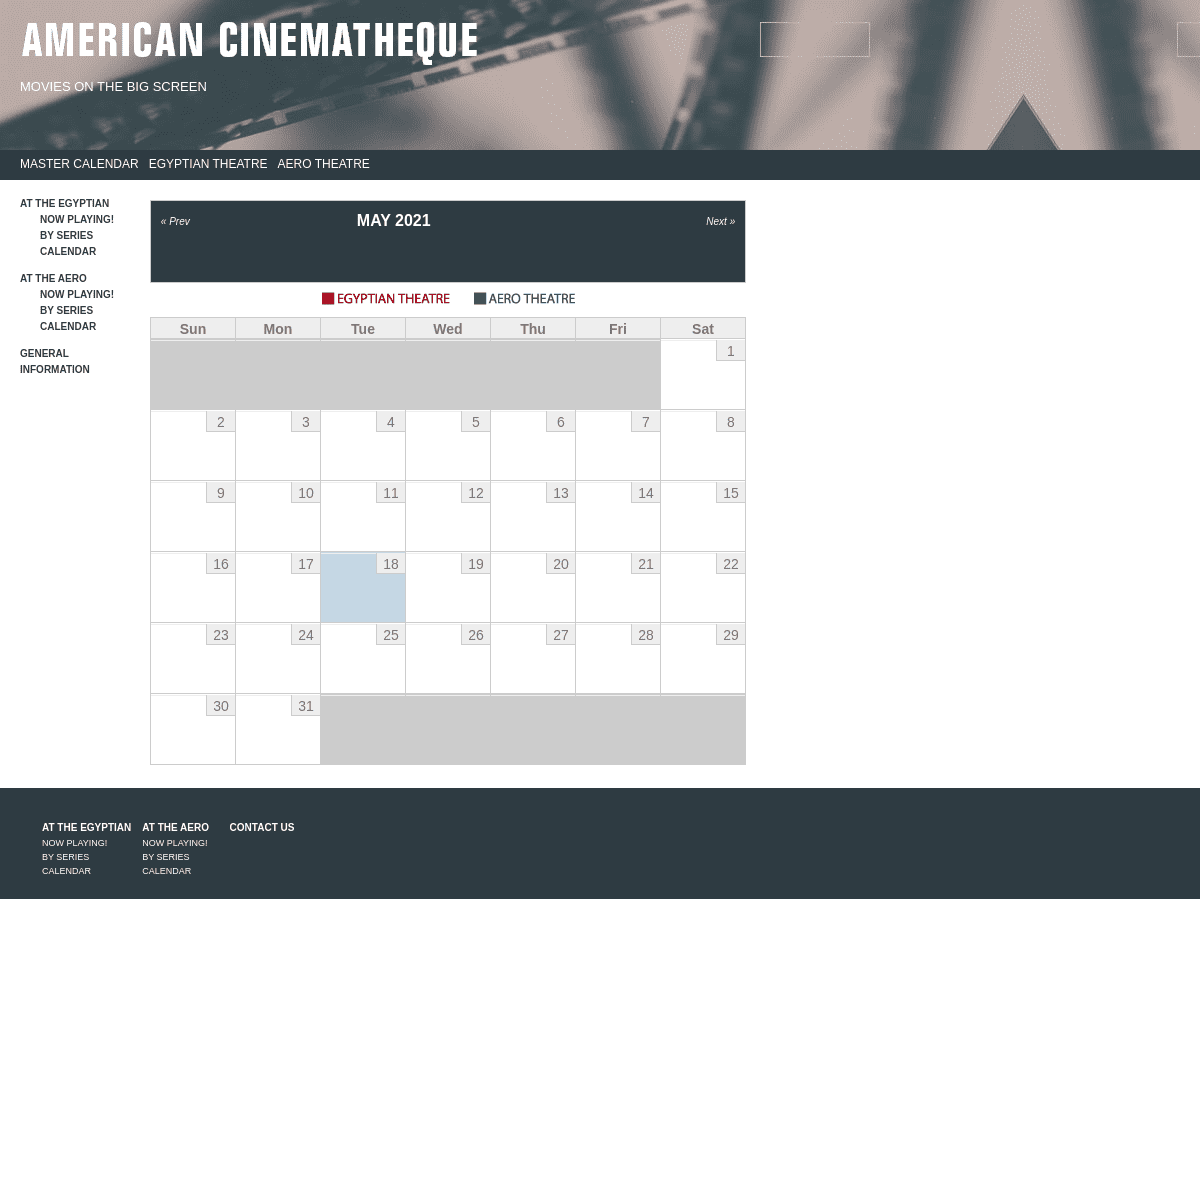 A complete backup of https://americancinemathequecalendar.com